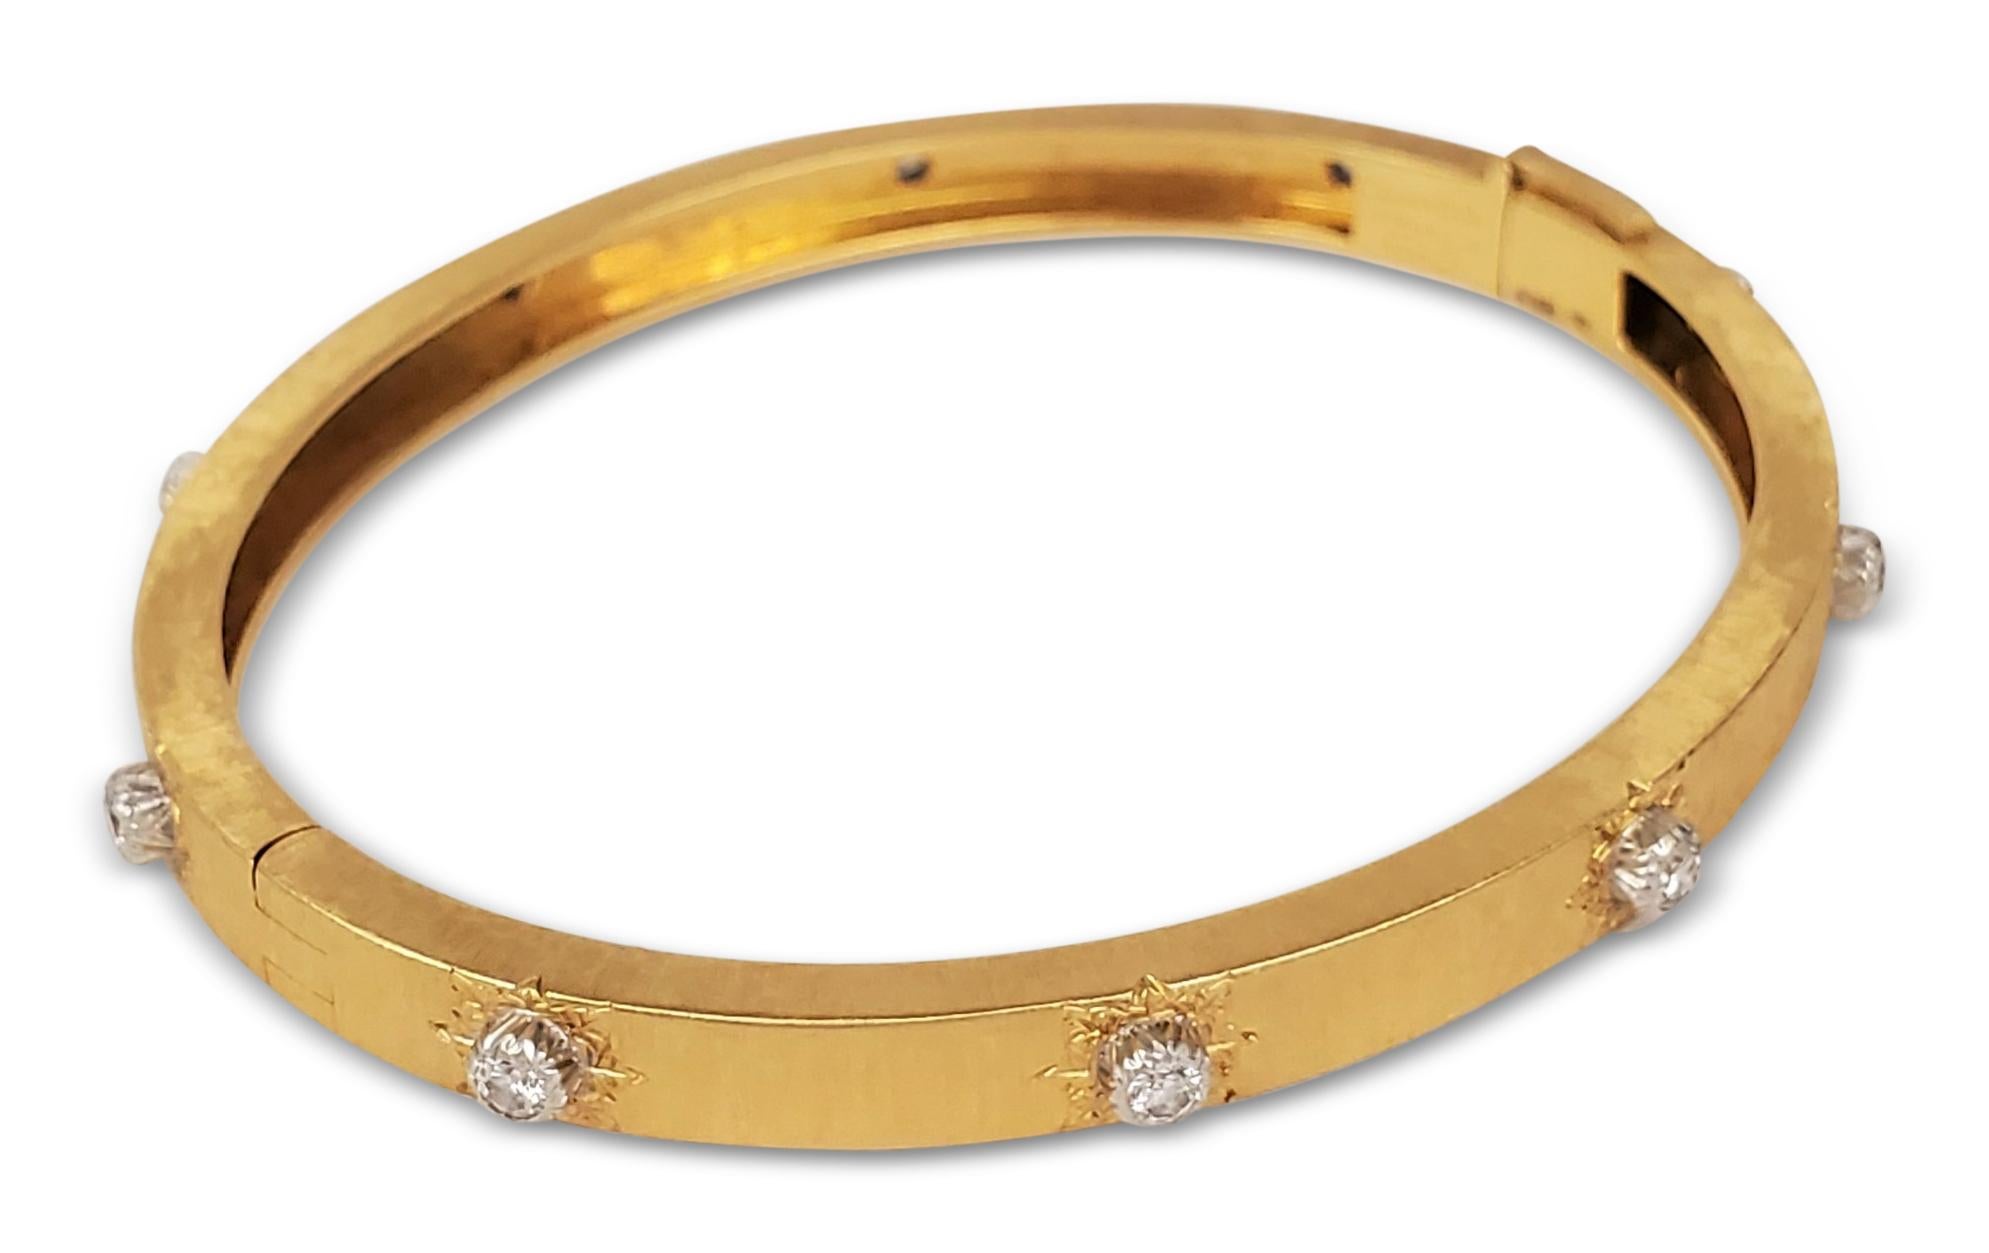 Authentic Buccellati 'Classica' bangle from the Macri collection is made in hand-engraved 18 karat yellow and white gold. The bracelet is set with 10 diamond stations of an estimated 0.48 cttw of round brilliant cut diamonds (E-F color, VS clarity).